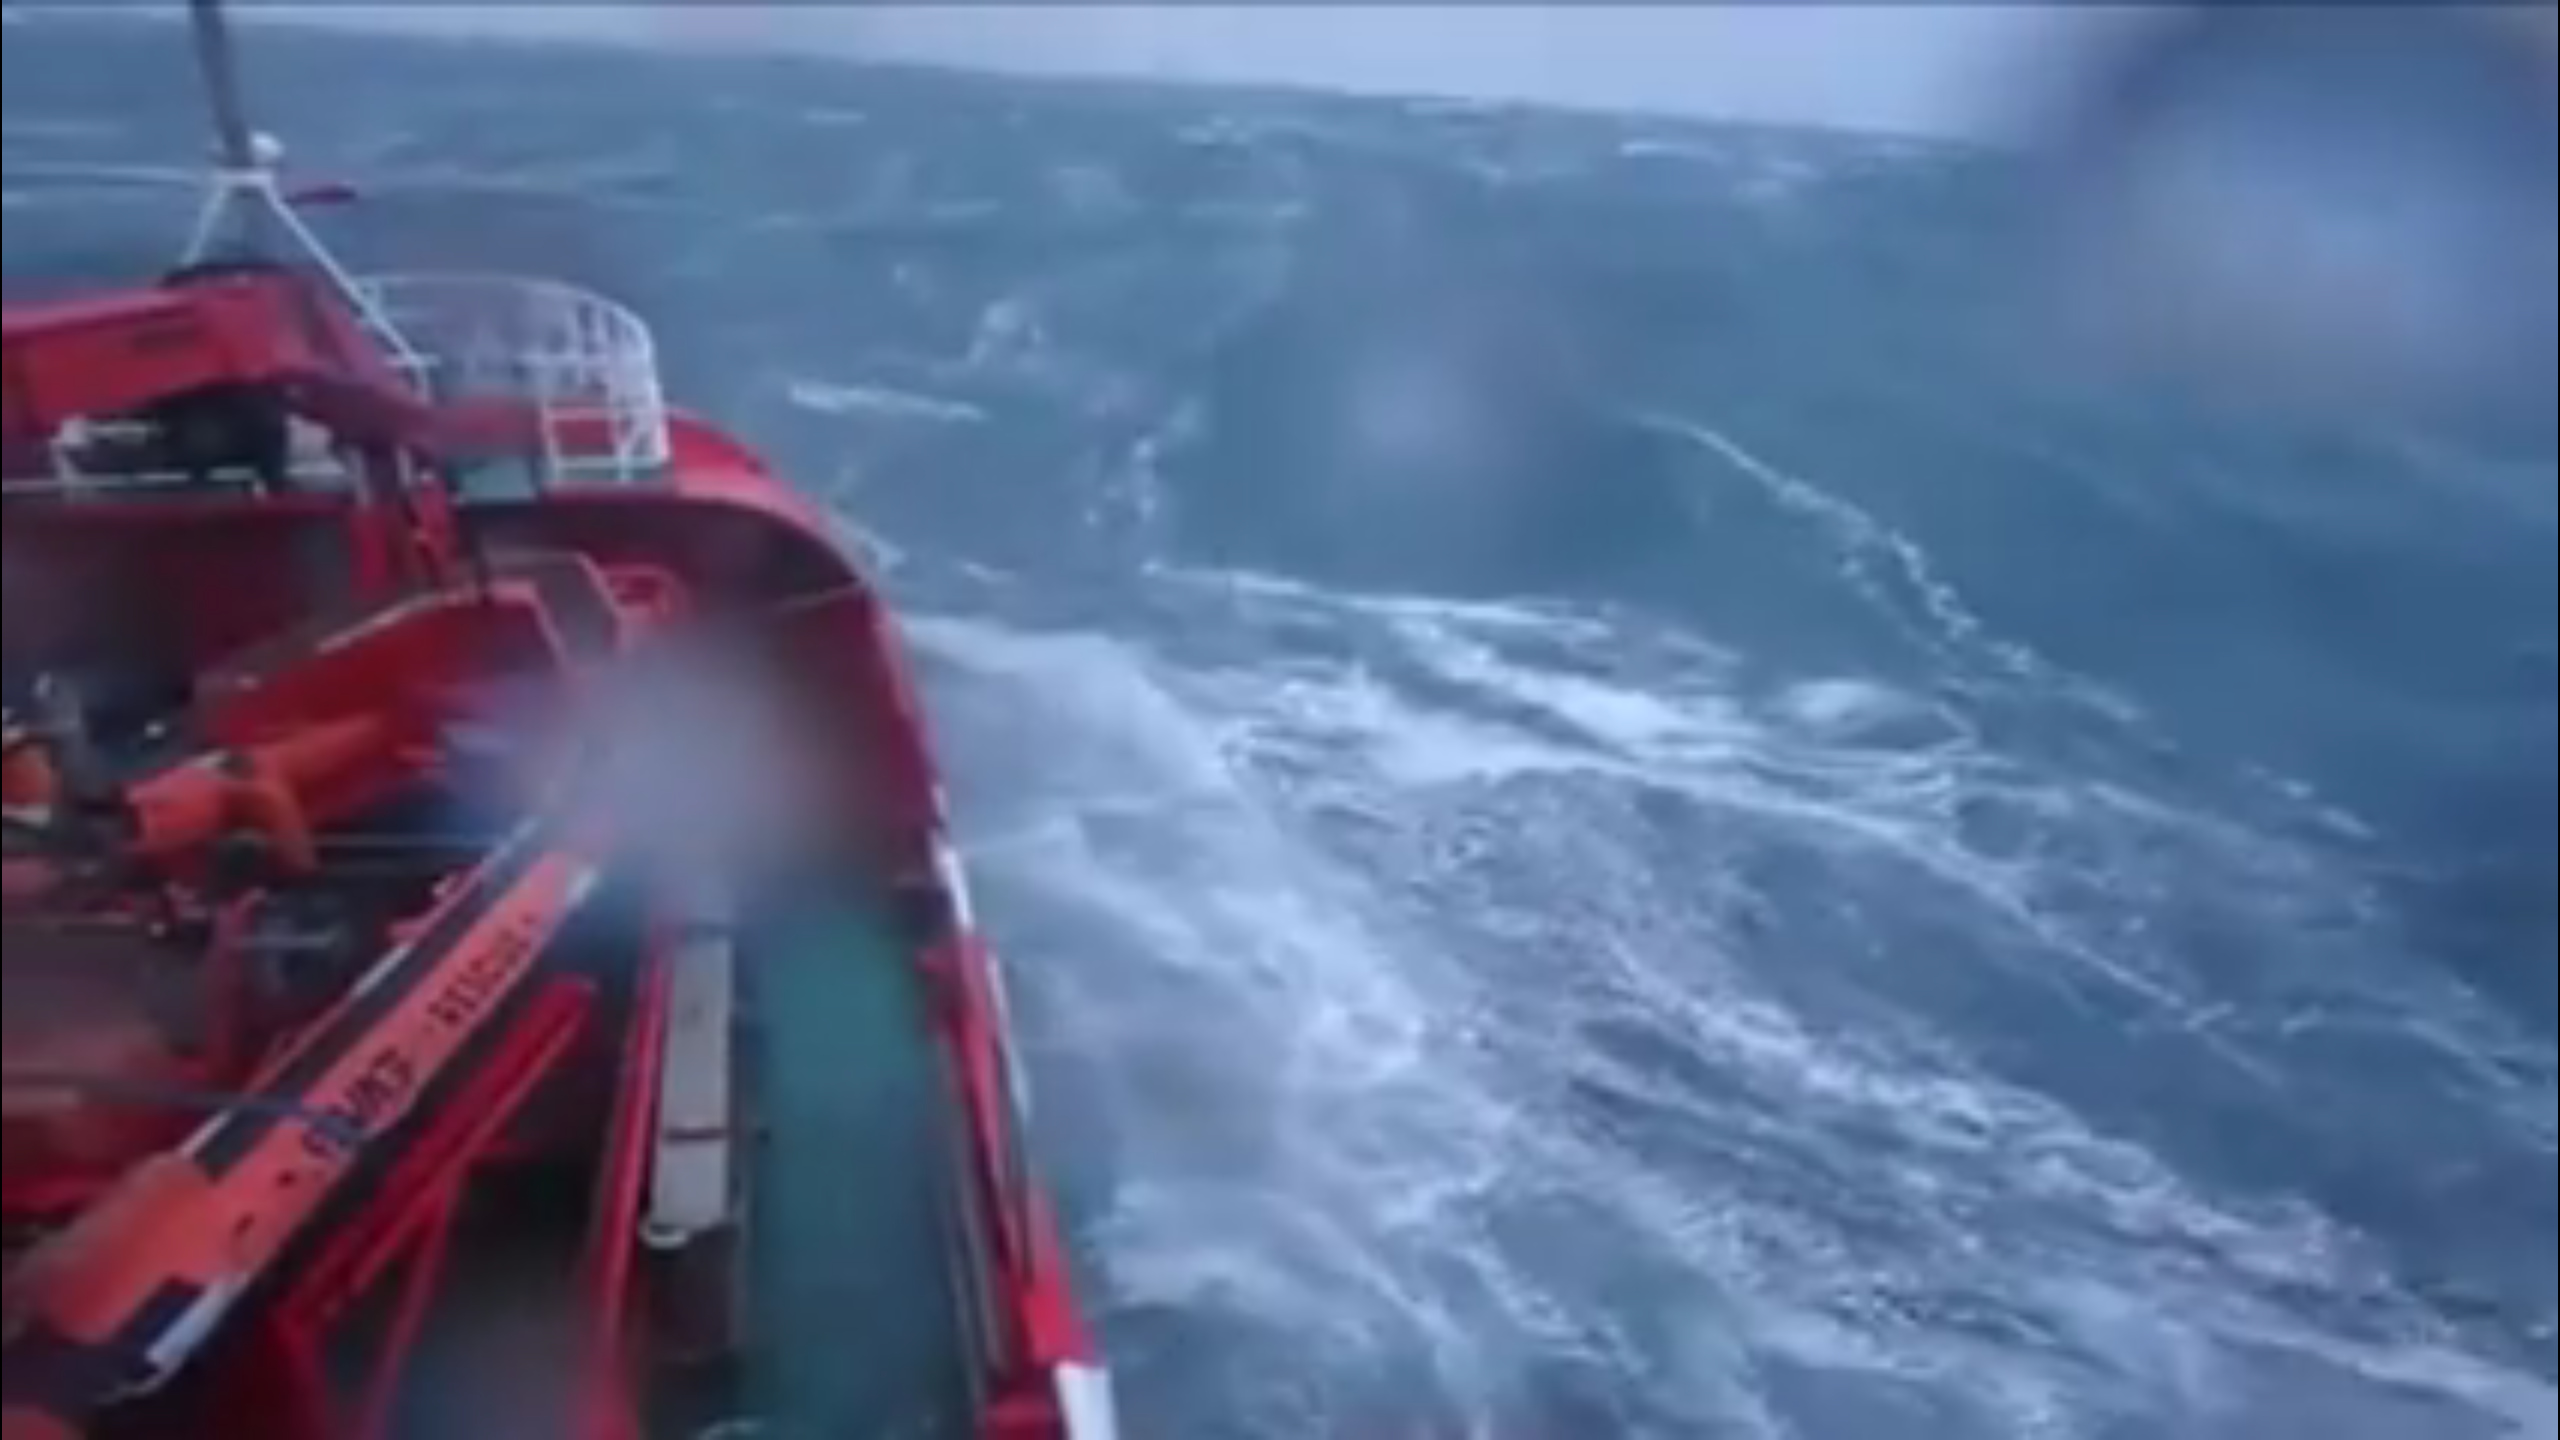 The Danish ship battles big waves in the North Sea